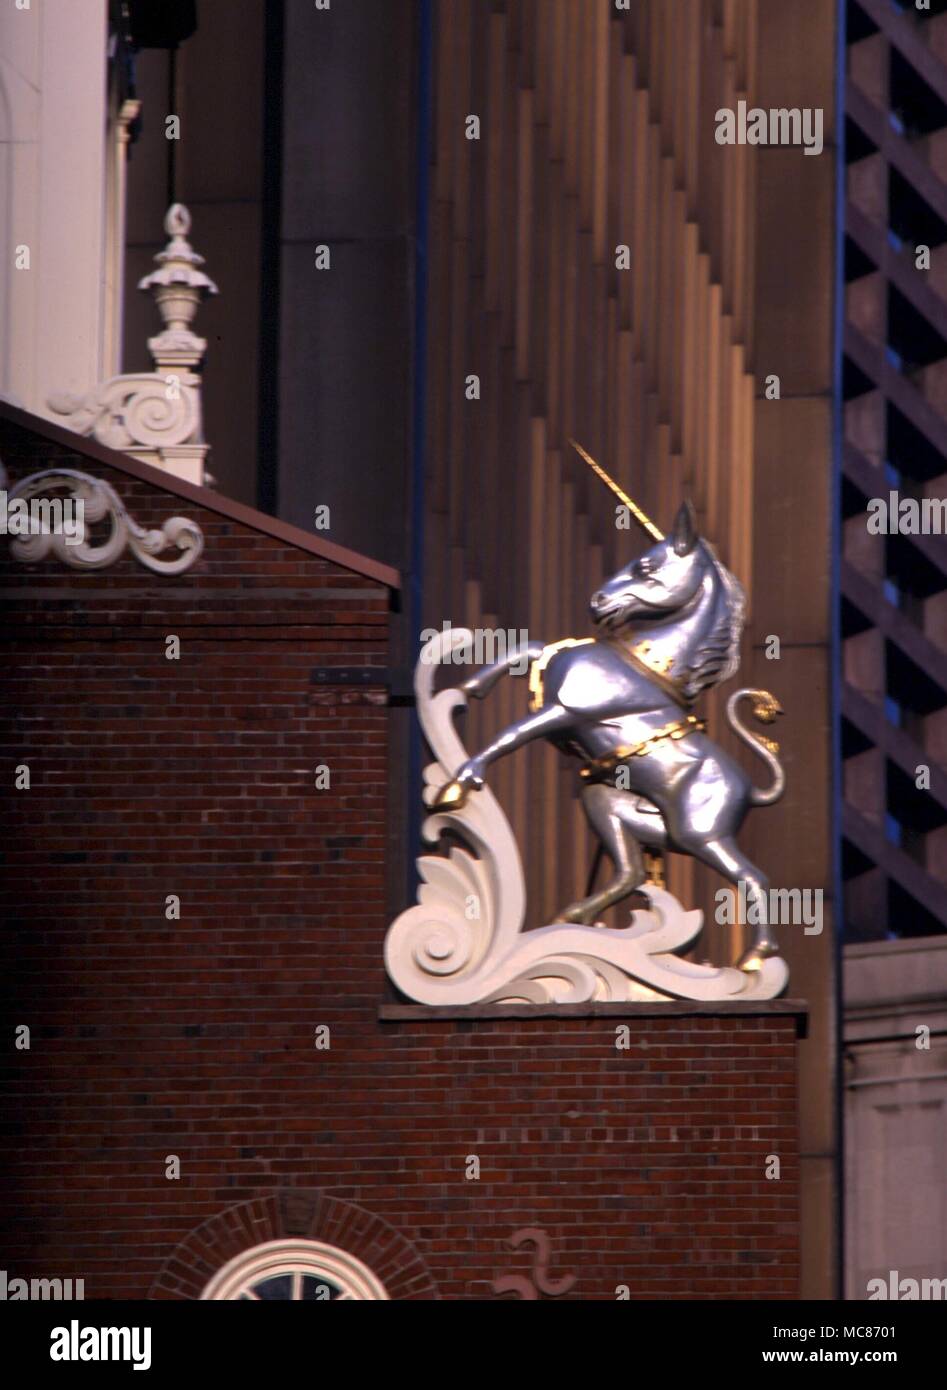 UNICORN Unicorn, as survival of the old heraldic British Coat of Arms, on the Old State Building, Boston, Massachussetts, USA Stock Photo